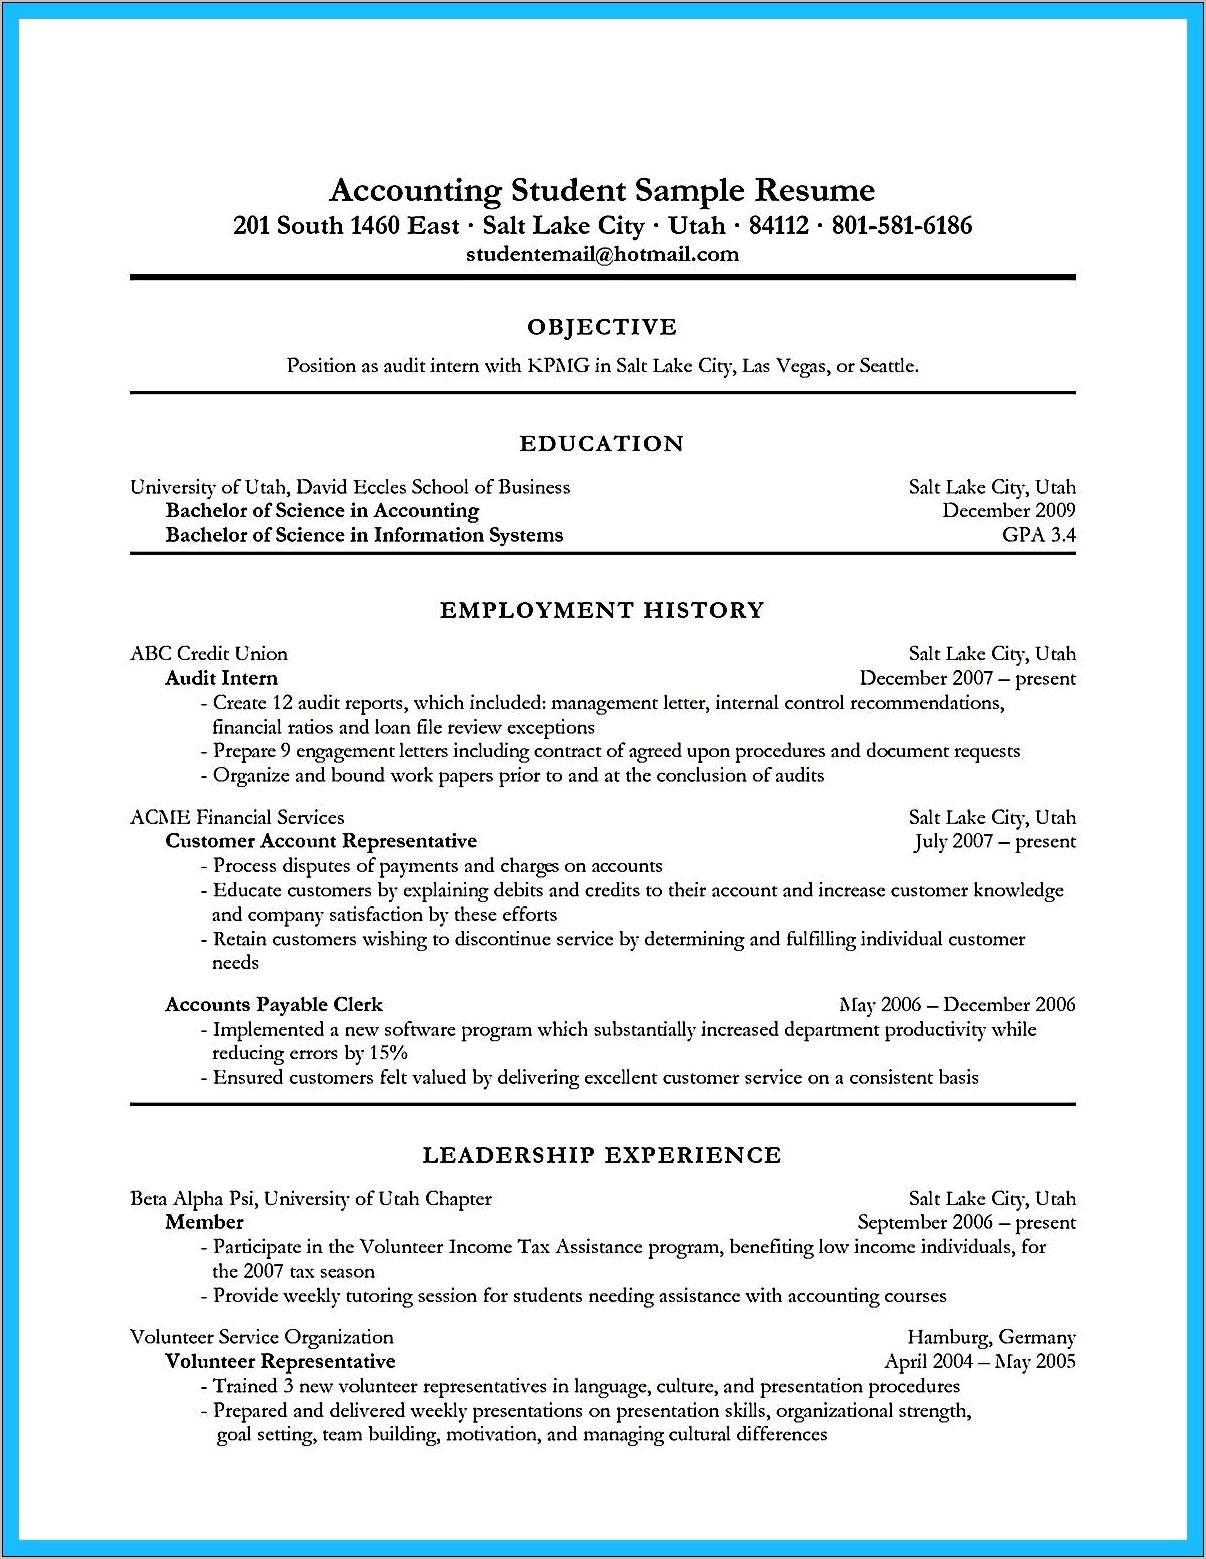 Sample Resume For Internship With No Experience